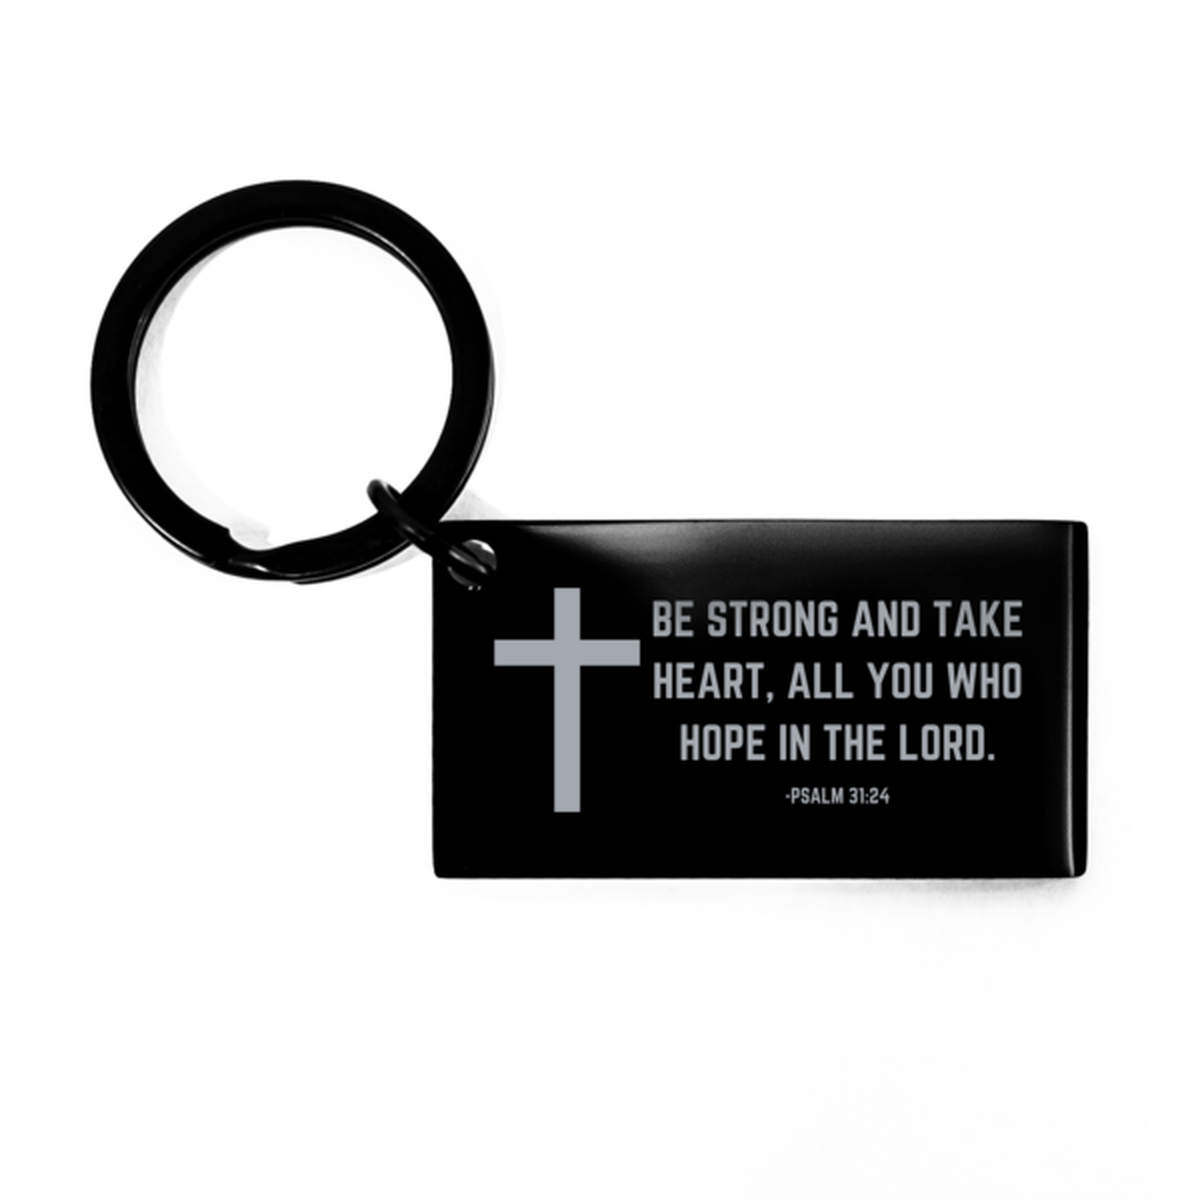 Baptism Gifts For Teenage Boys Girls, Christian Bible Verse Black Keychain, Be strong and take heart, Confirmation Gifts, Bible Verse Keyring for Son, Godson, Grandson, Nephew